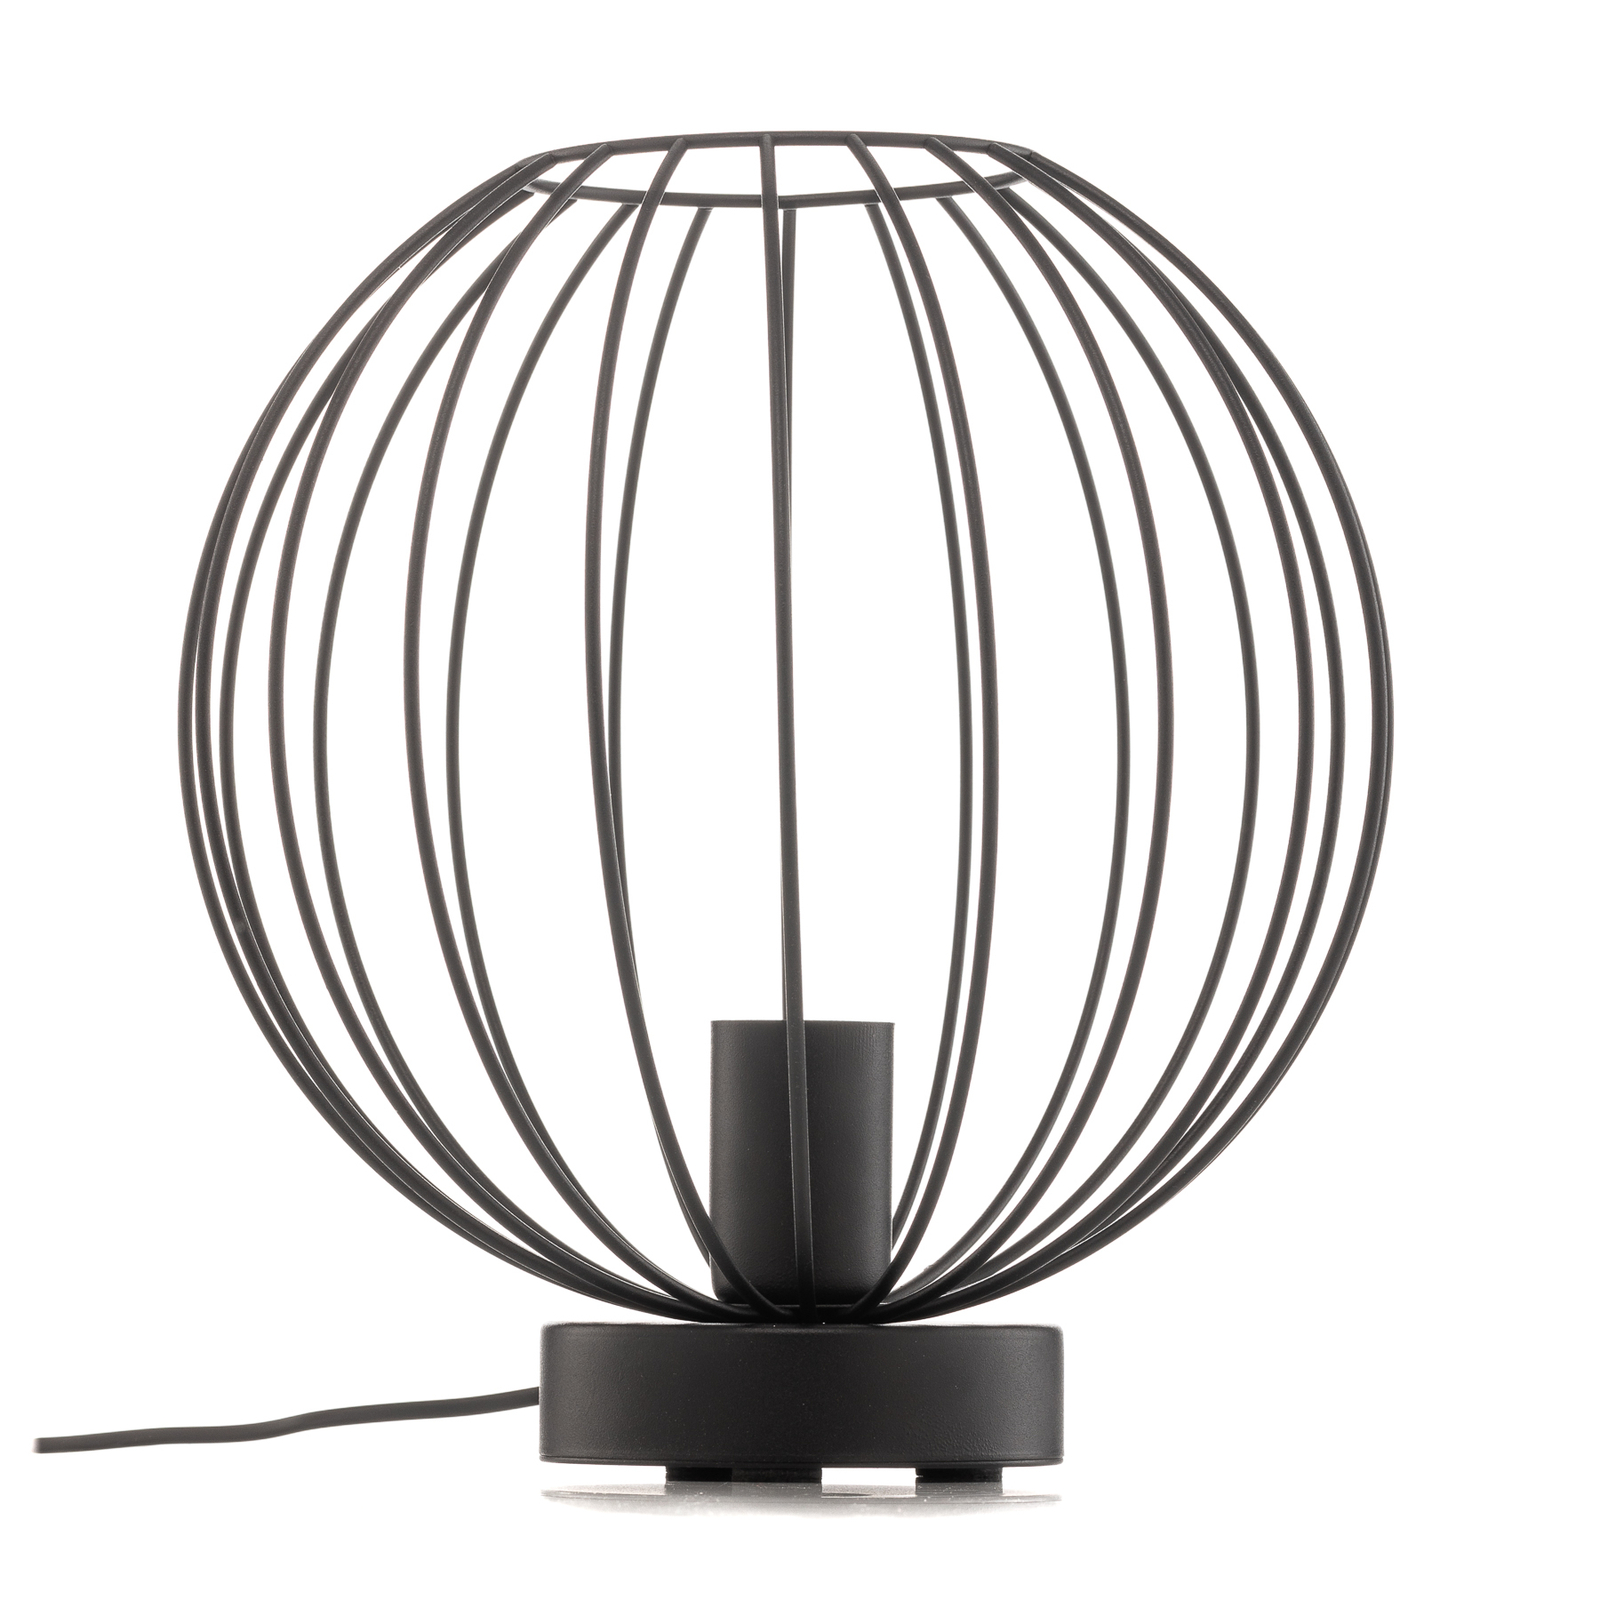 Cumera table lamp with cage shade, Ø 30 cm